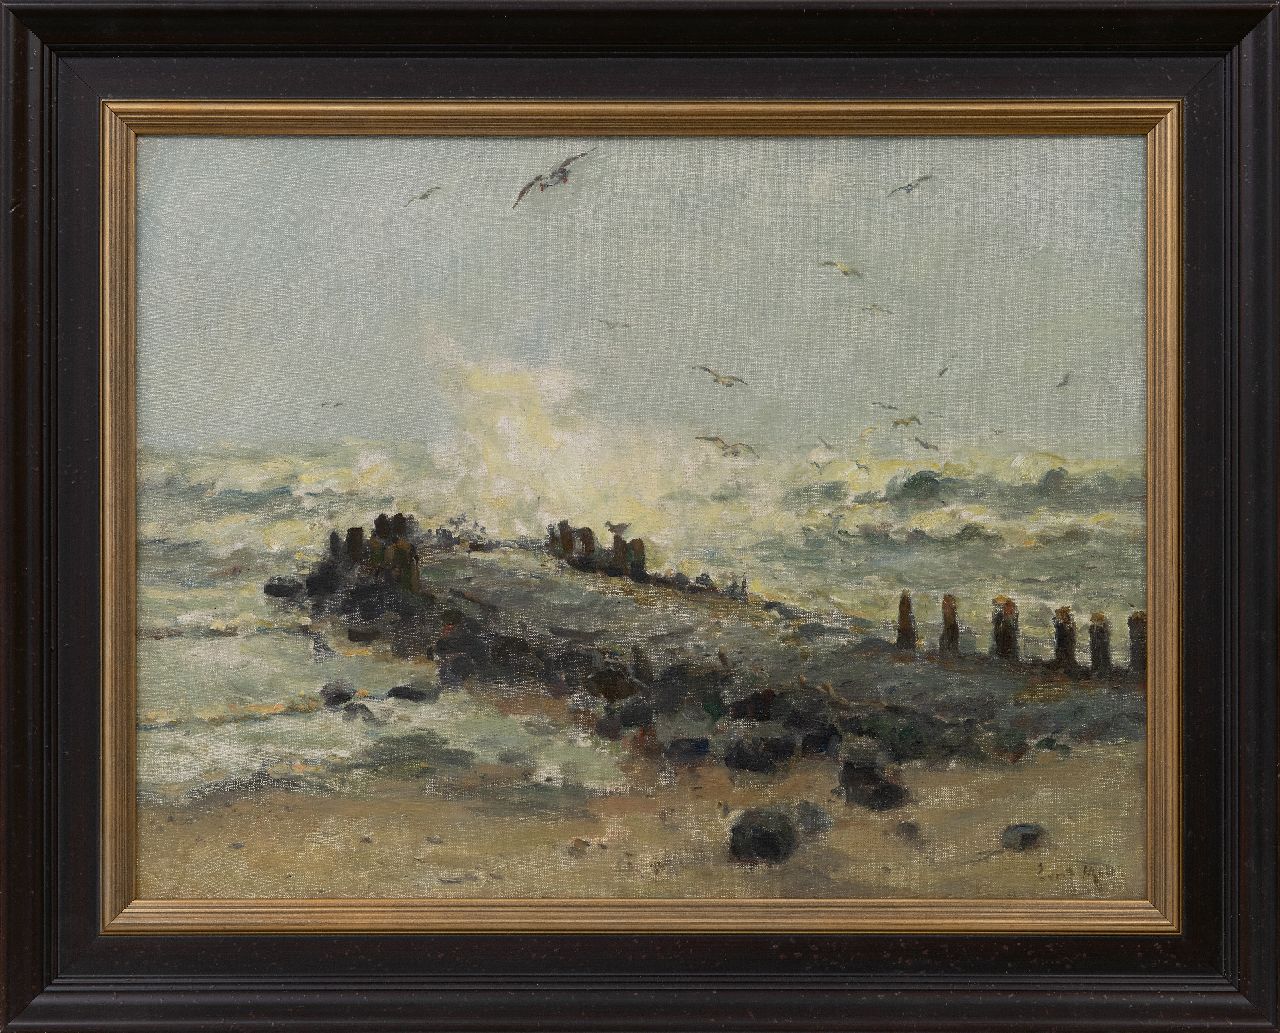 Moll E.  | Evert Moll | Paintings offered for sale | A breakwater in a storm, oil on canvas 39.0 x 51.4 cm, signed l.r. and without frame